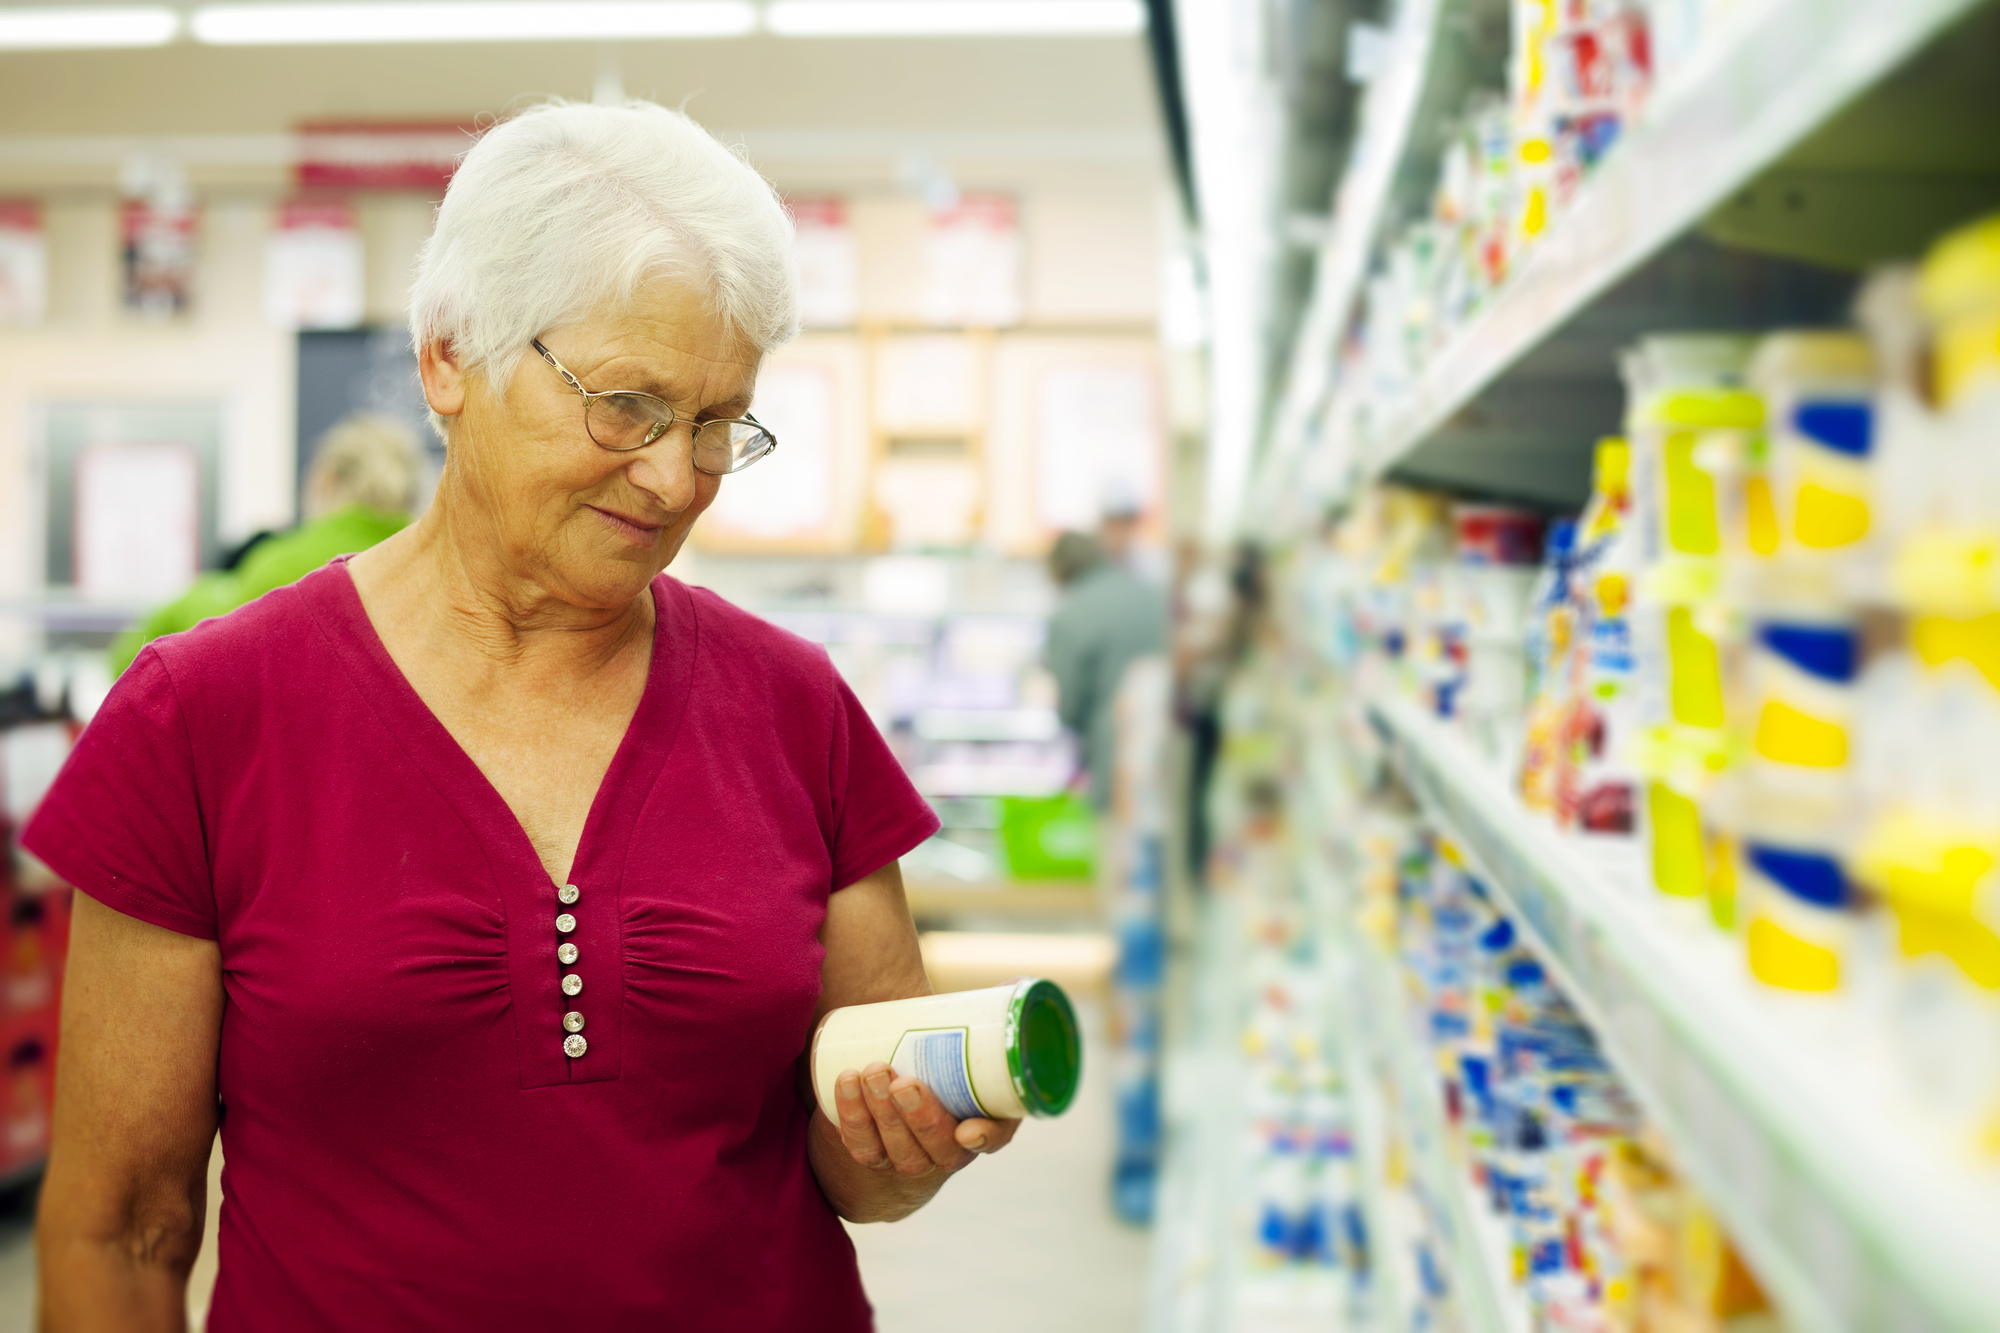 The impact of hard-to-open packaging on the wellbeing of elderly customers